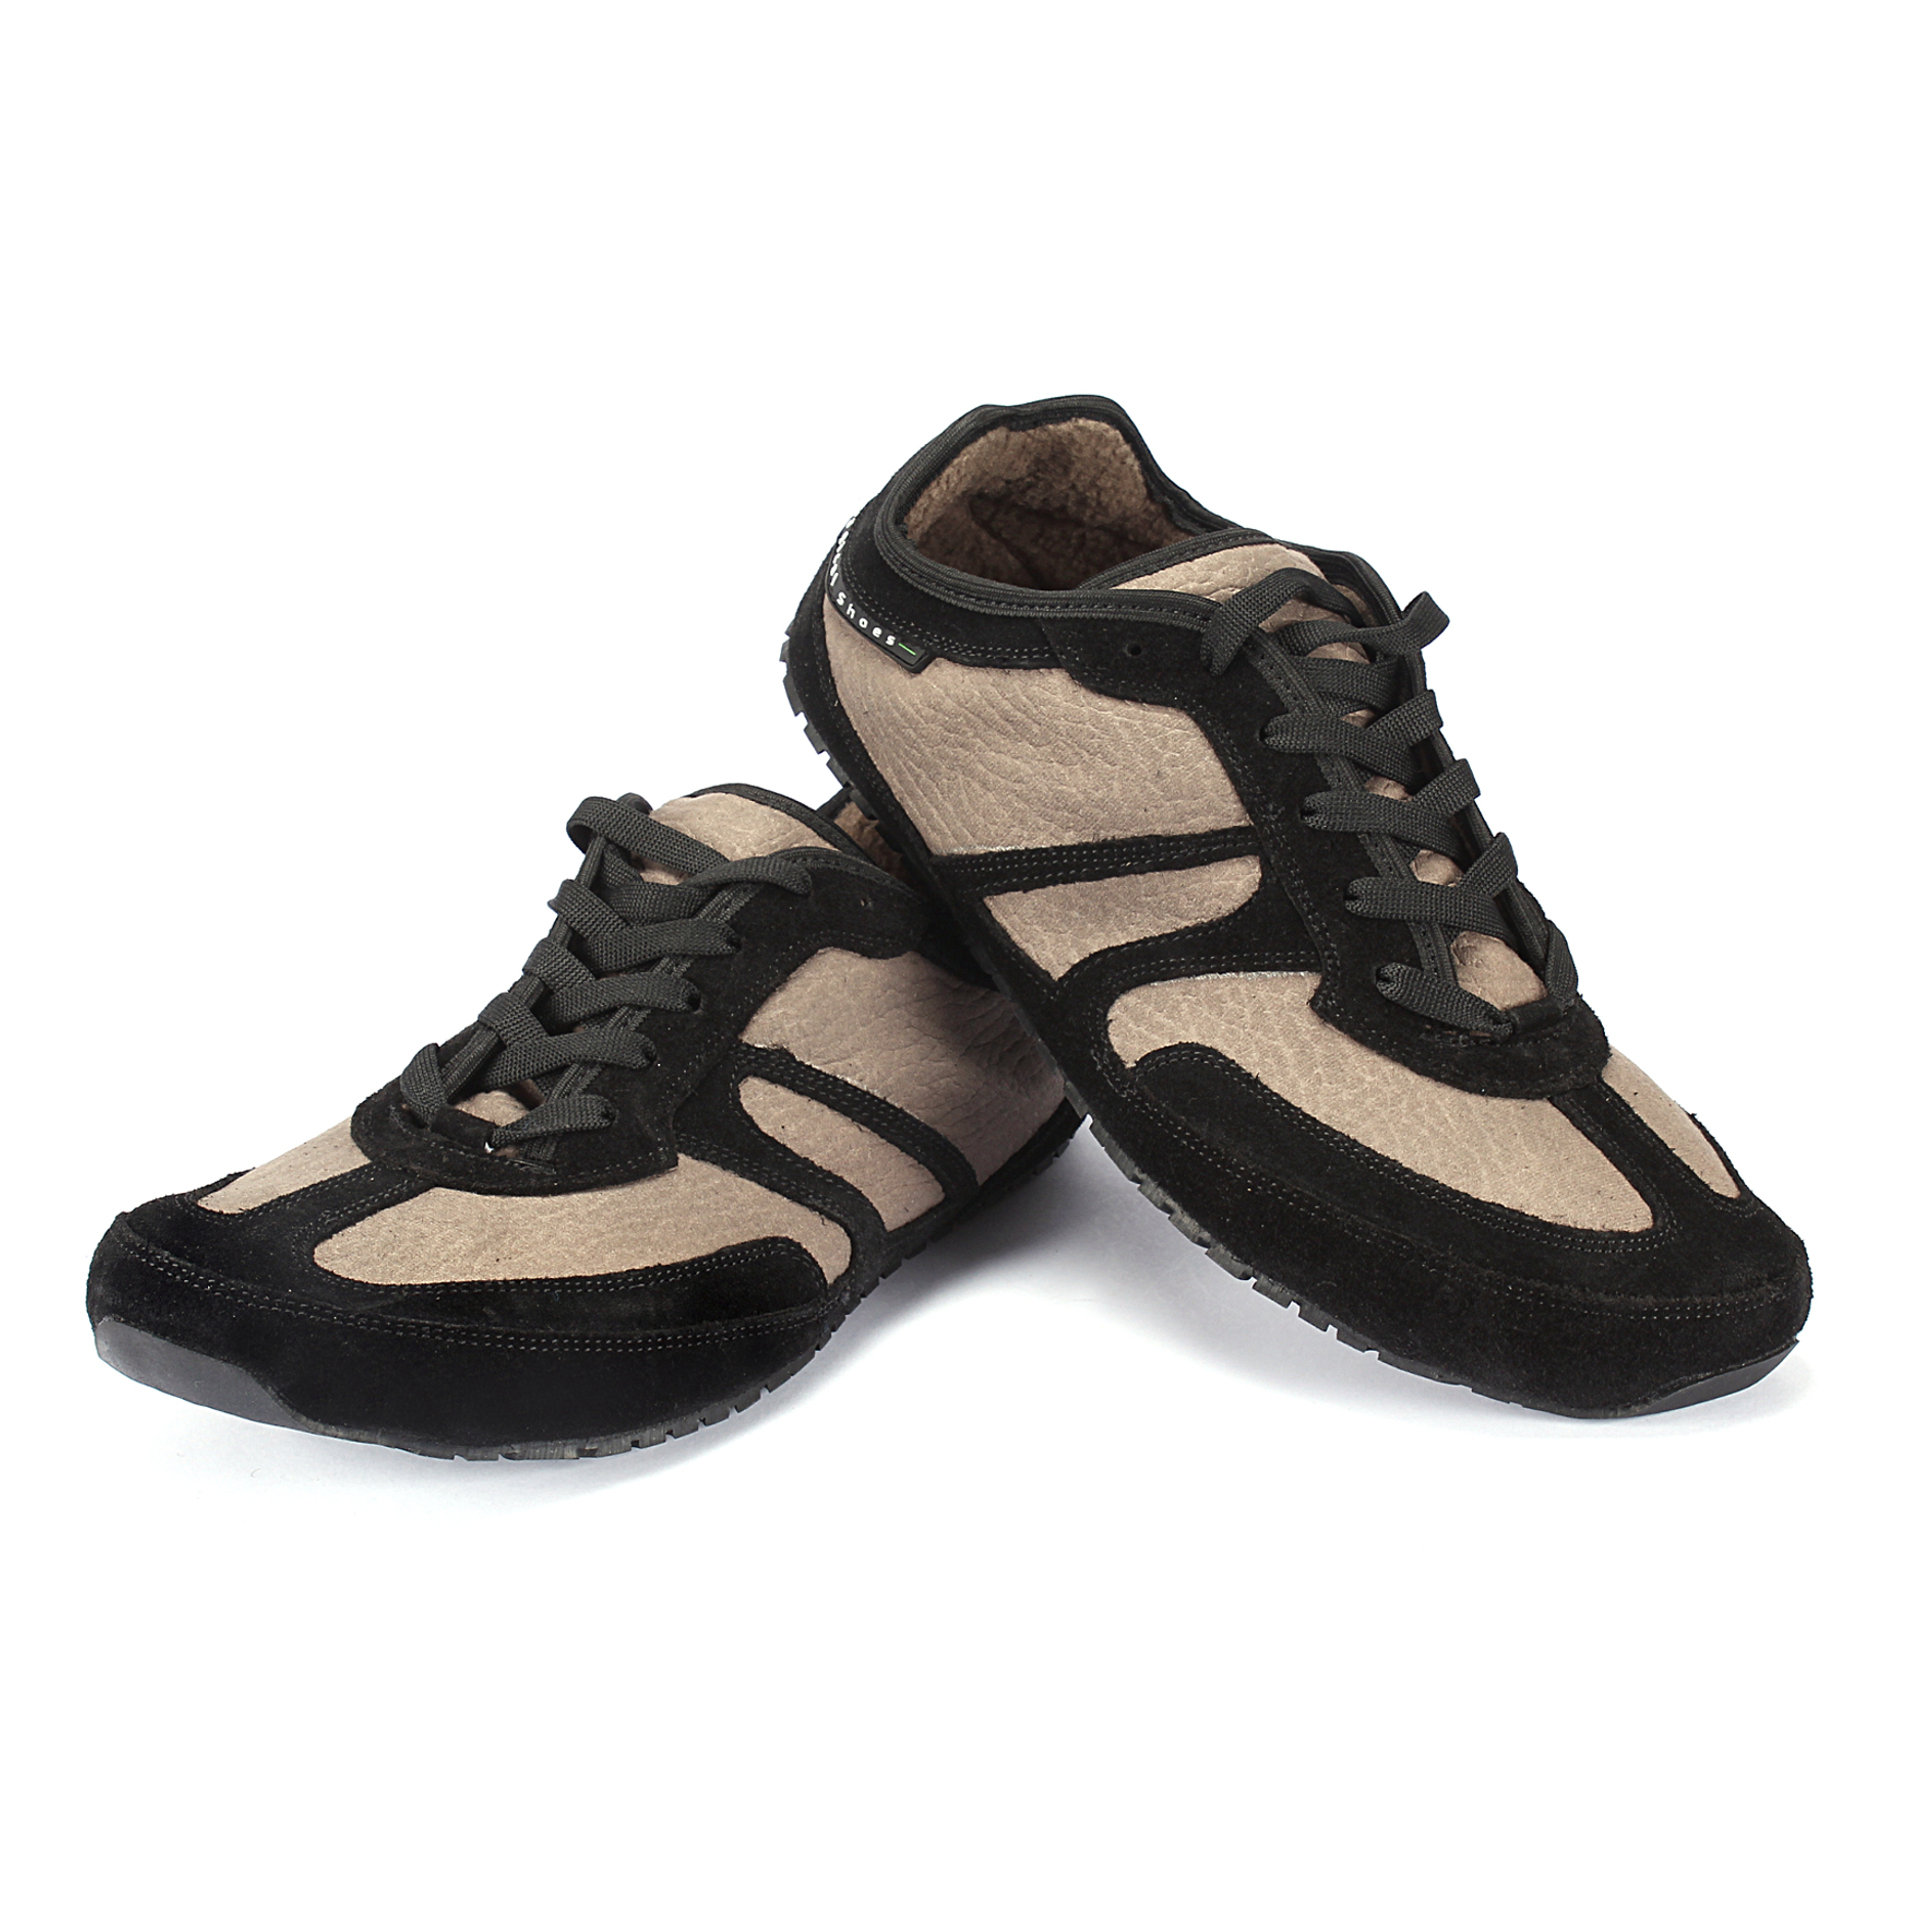 Explorer Autumn Grizzly barefoot shoes - Magical Shoes